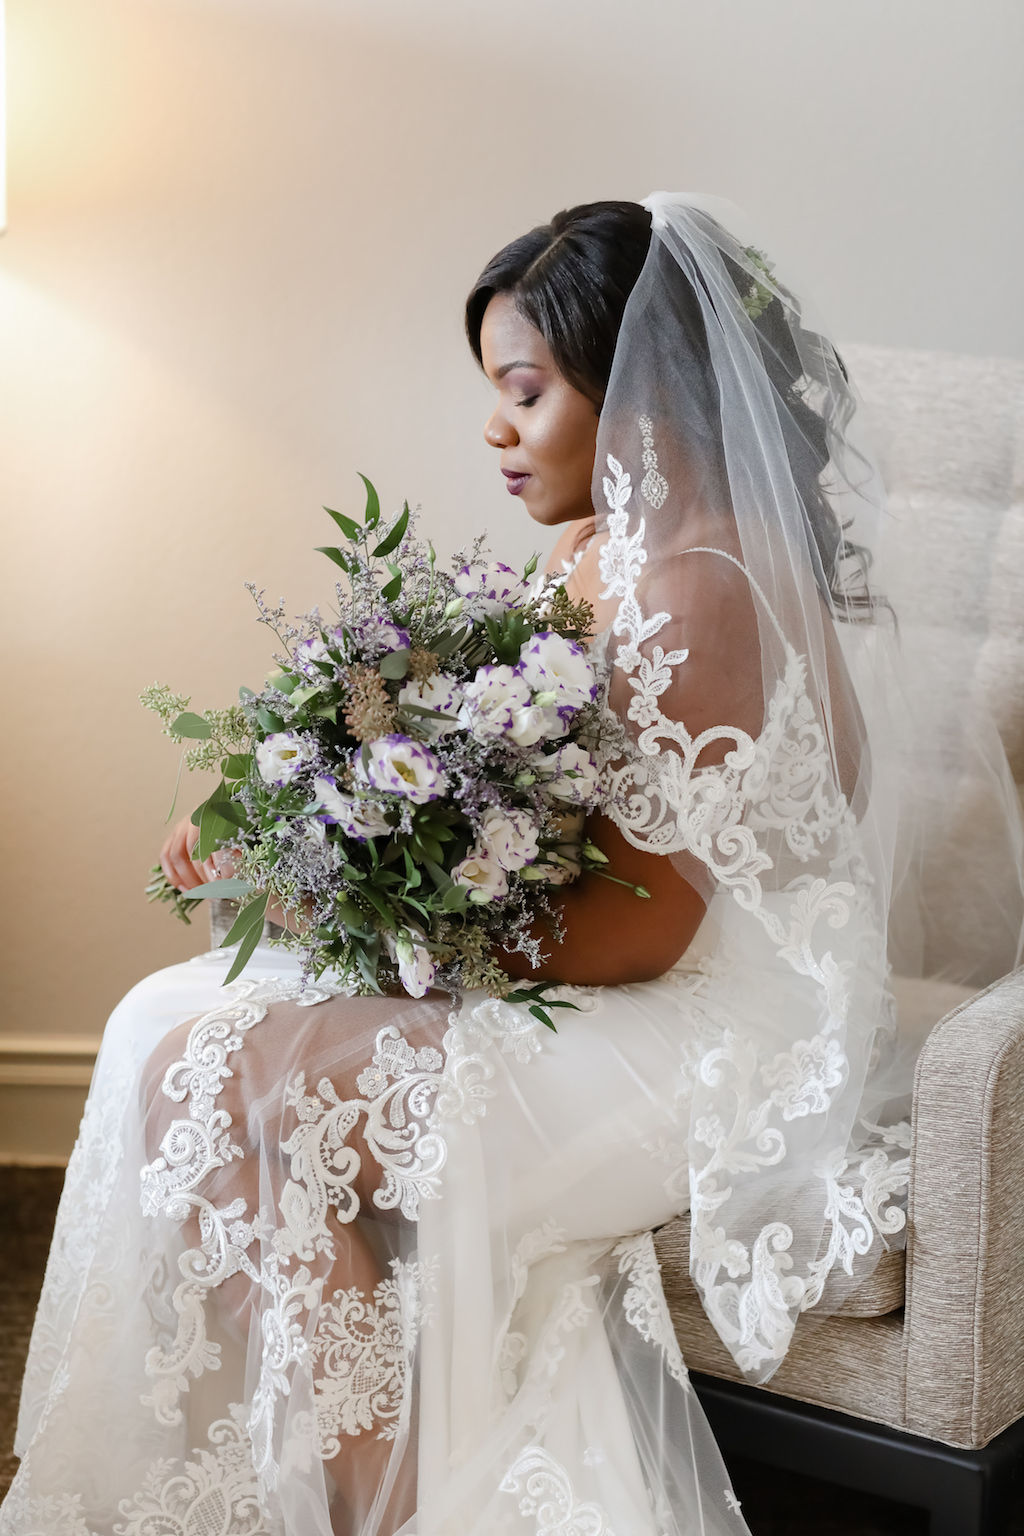 Rustic Chic Bride Beauty Wedding Portrait in Lace Off the Shoulder Wedding Dress with Elegant Lace Lined Veil, Organic Garden Purple, Lilac and White with Greenery Floral Bridal Bouquet | Tampa Wedding Photographer Lifelong Photography Studio | Wedding Hair and Makeup Michele Renee the Studio | Wedding Dress Boutique Truly Forever Bridal